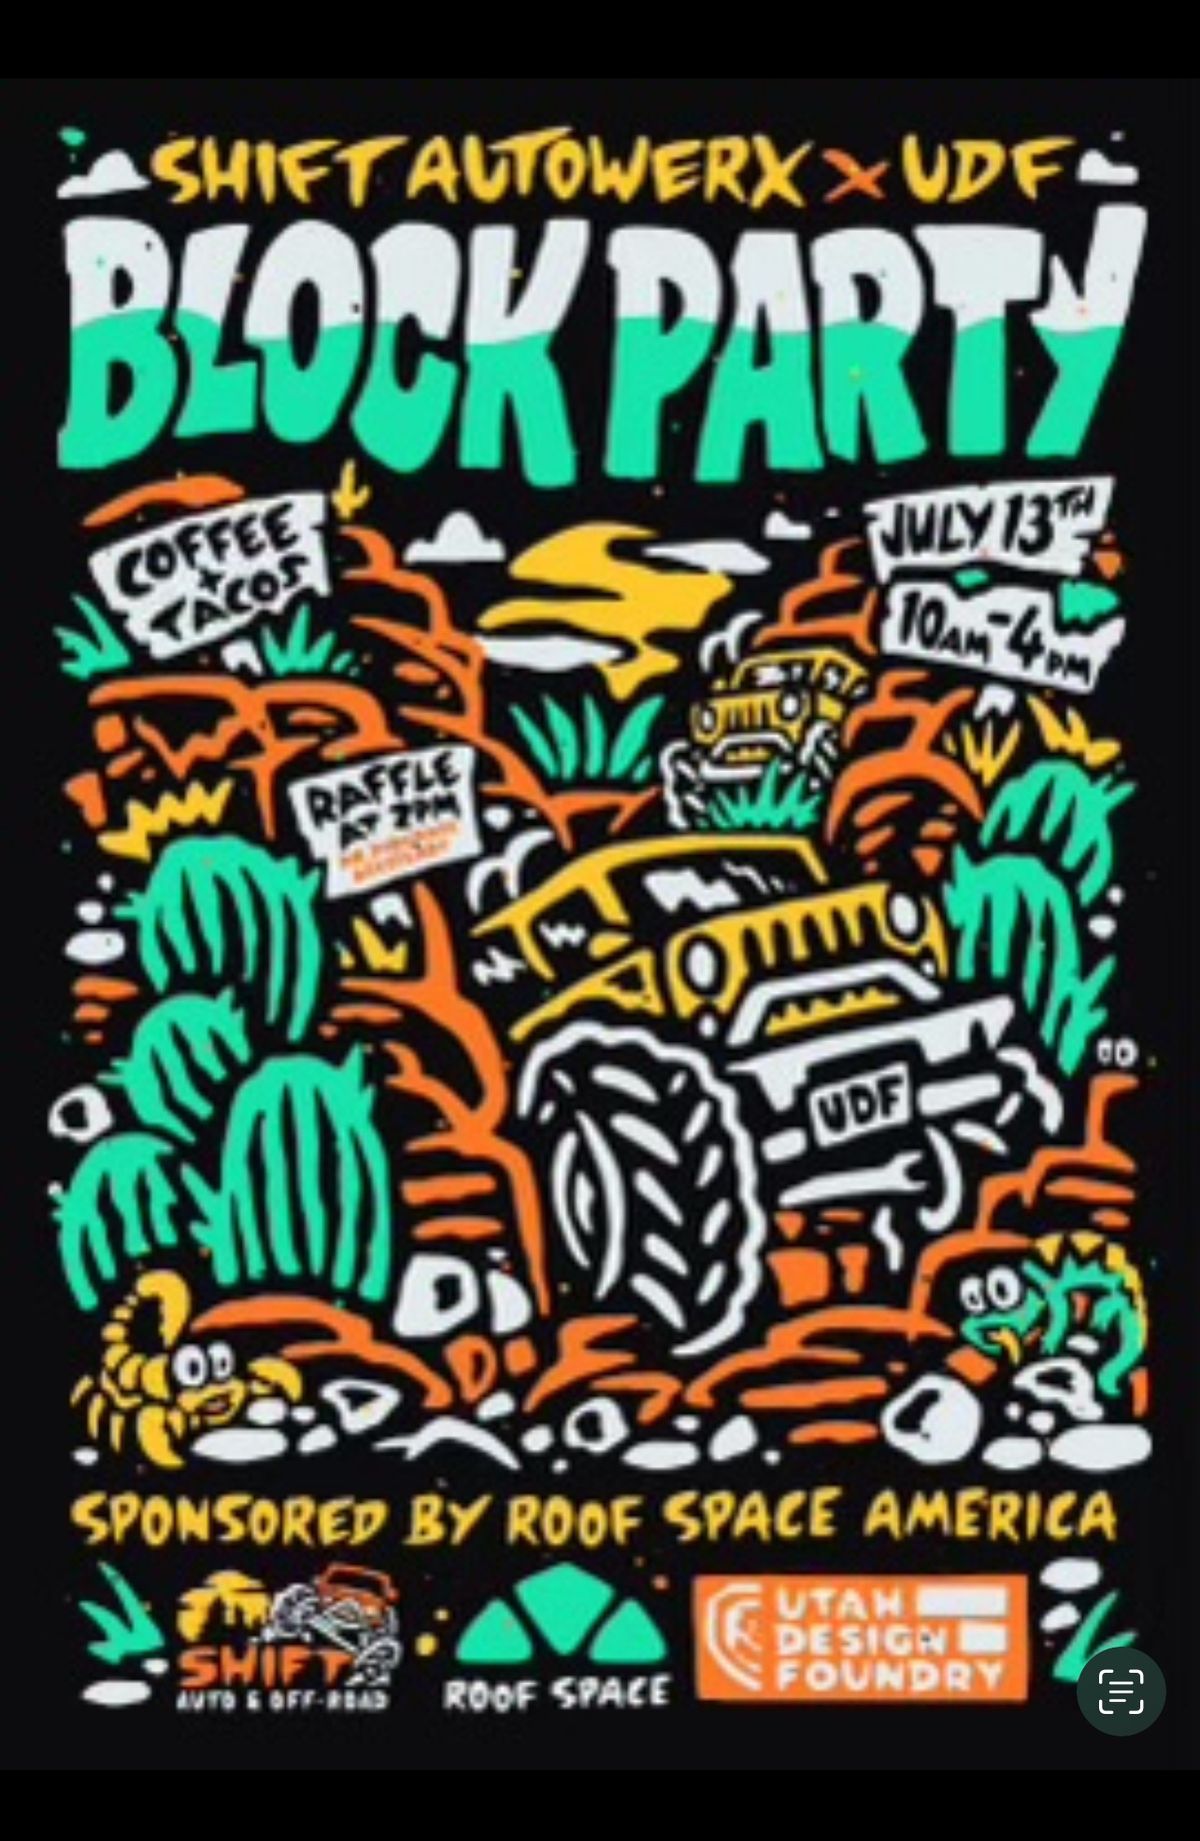 Shift auto and off road+udf block party 